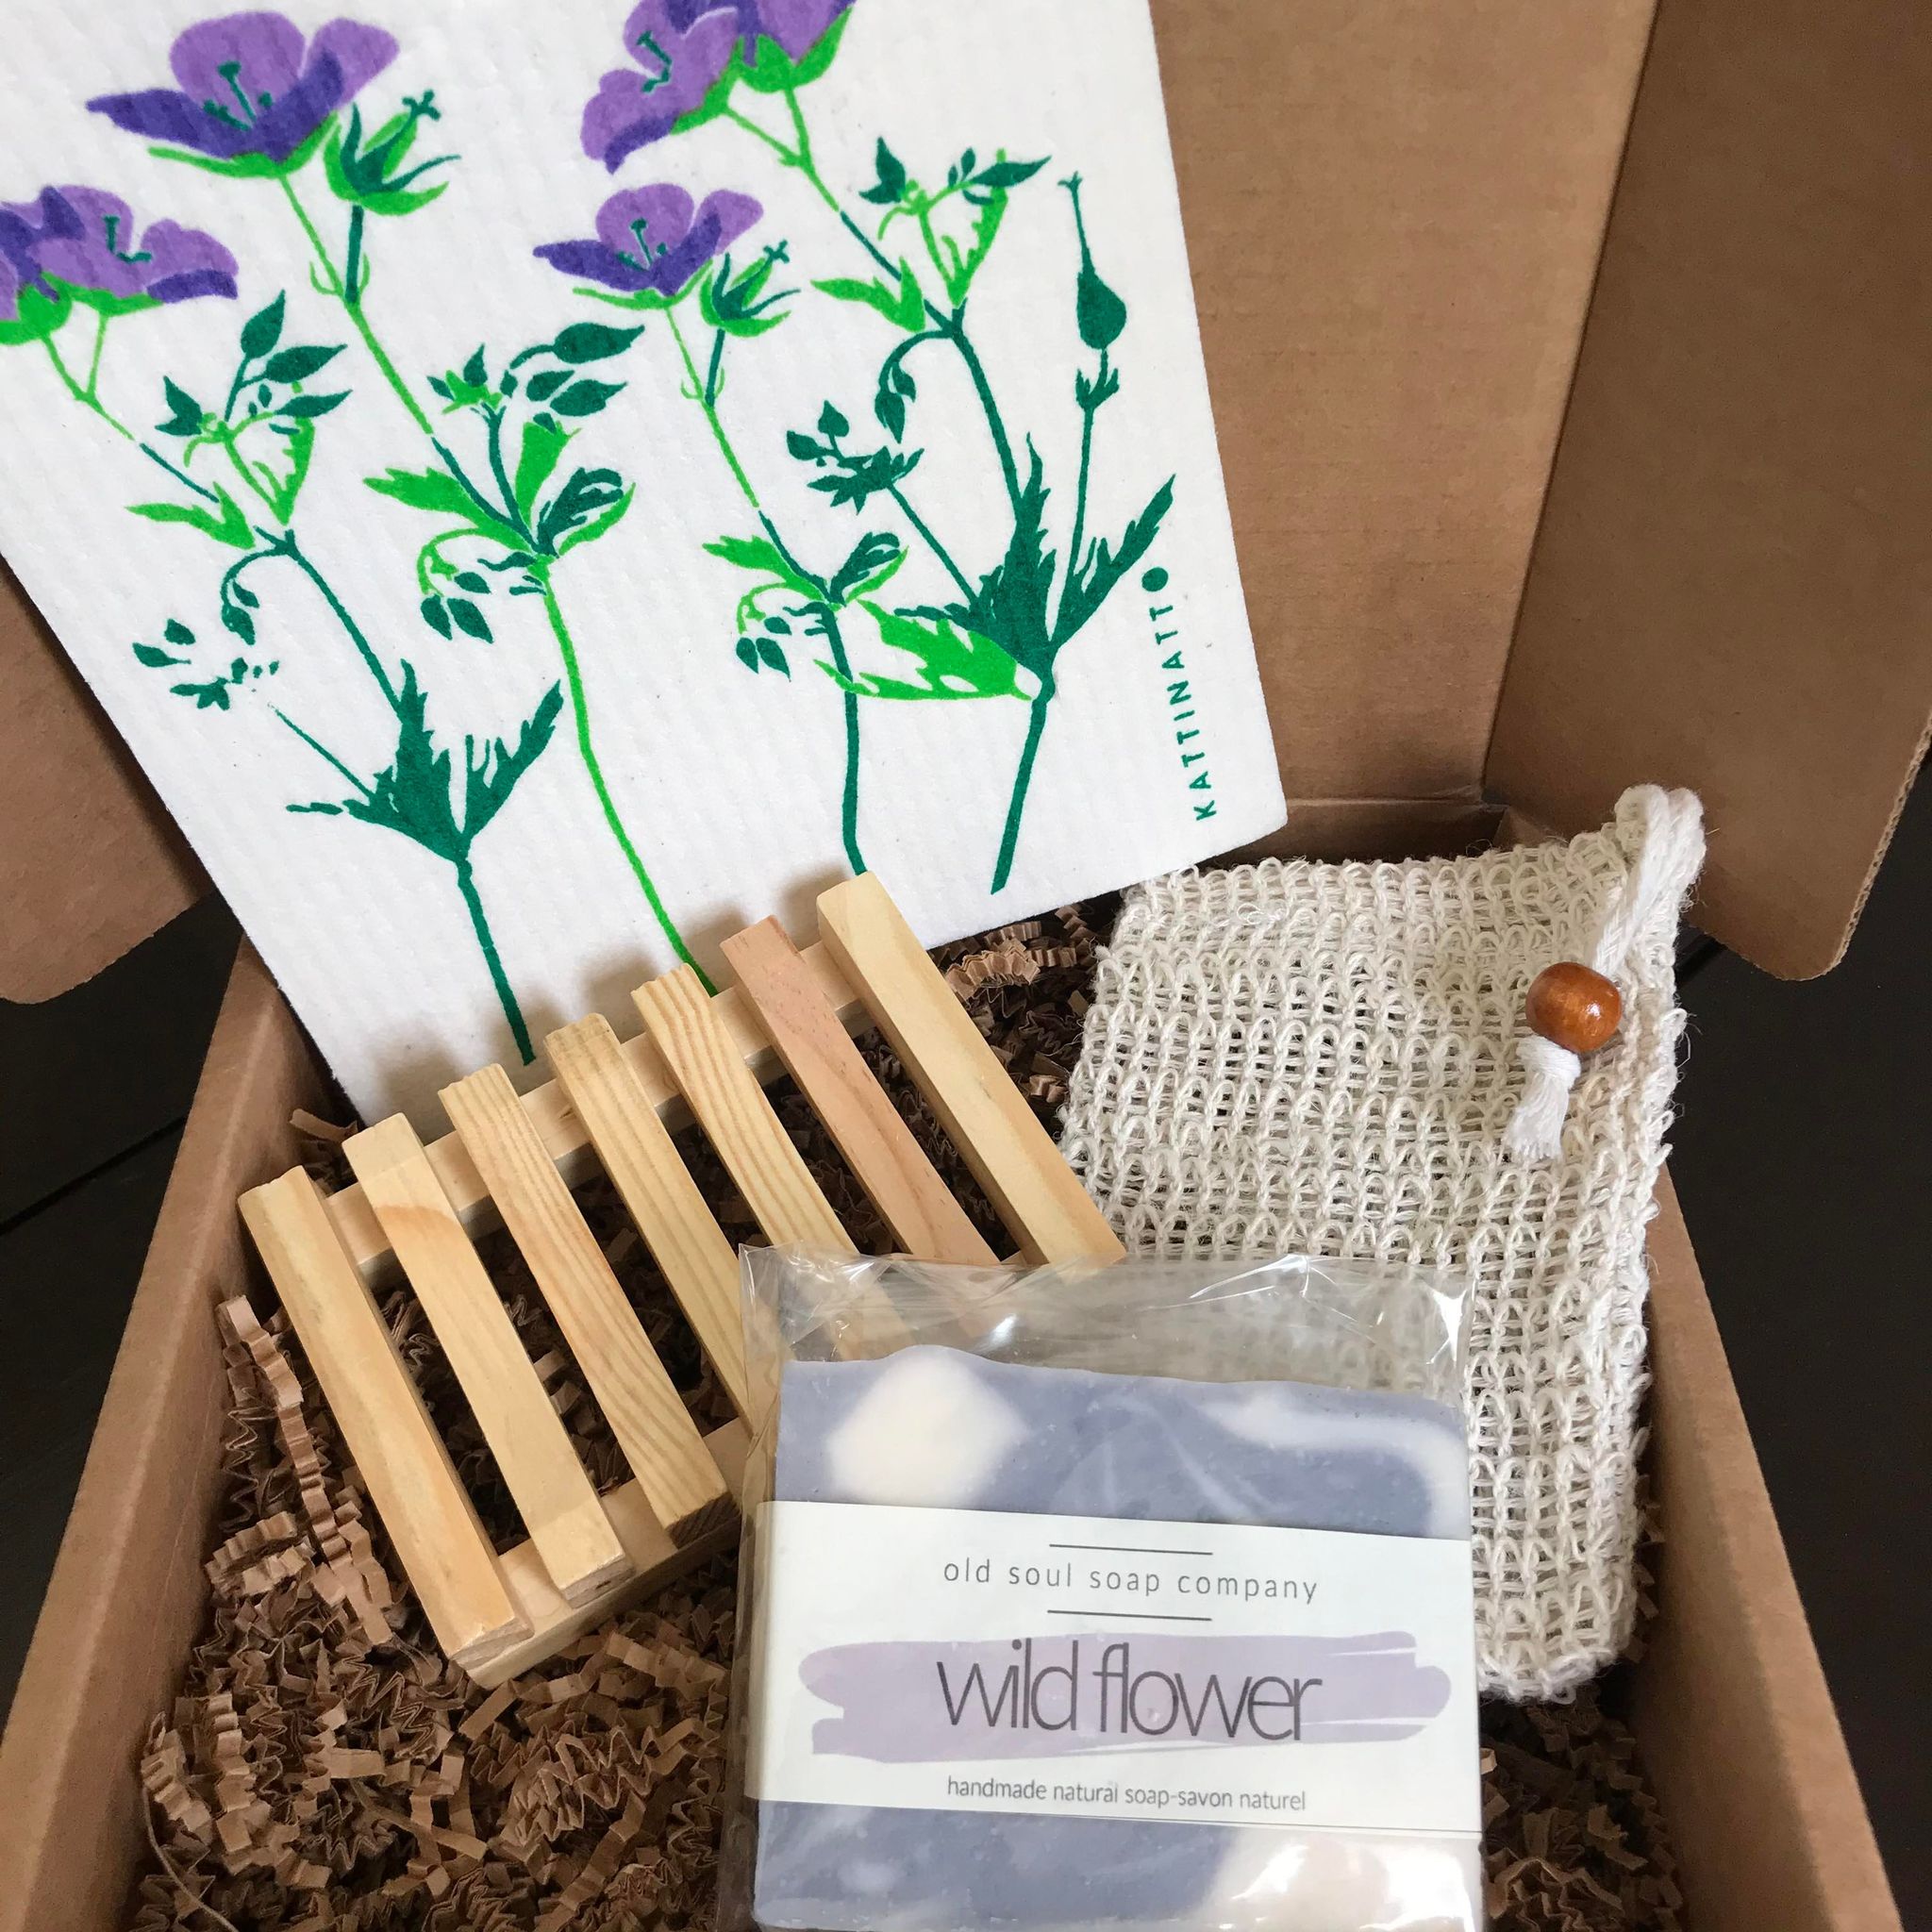 Beautiful handcrafted Canadian made 'wild flower' Old Soul Soap Company vegan soap, wood soap dish, sisal soap pouch body scrubber and Swedish sponge cloth with purple flowers on a white background in a gift box